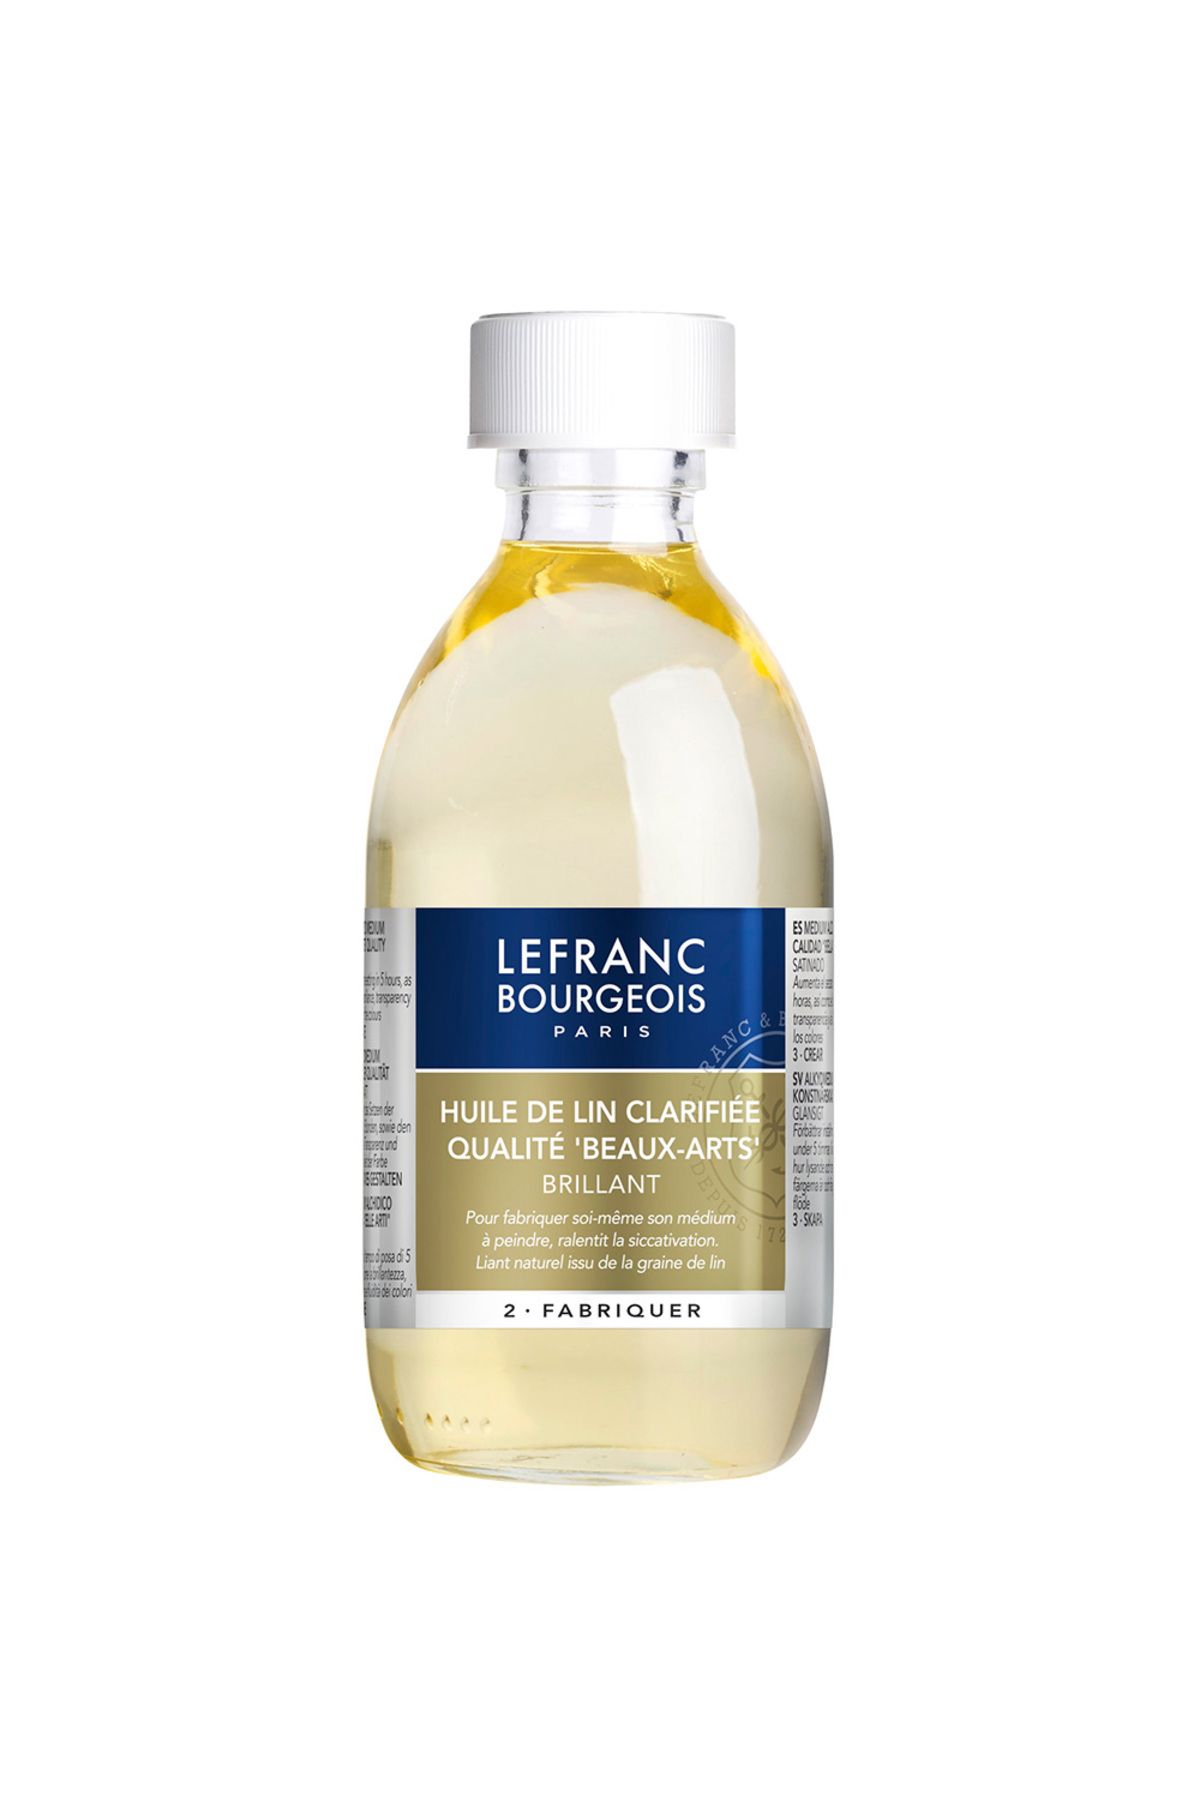 Lefranc Bourgeois Clarified Linseed Oil (Arıtılmış Keten Yağı) 250ml (Arıtılmış Keten Yağı)